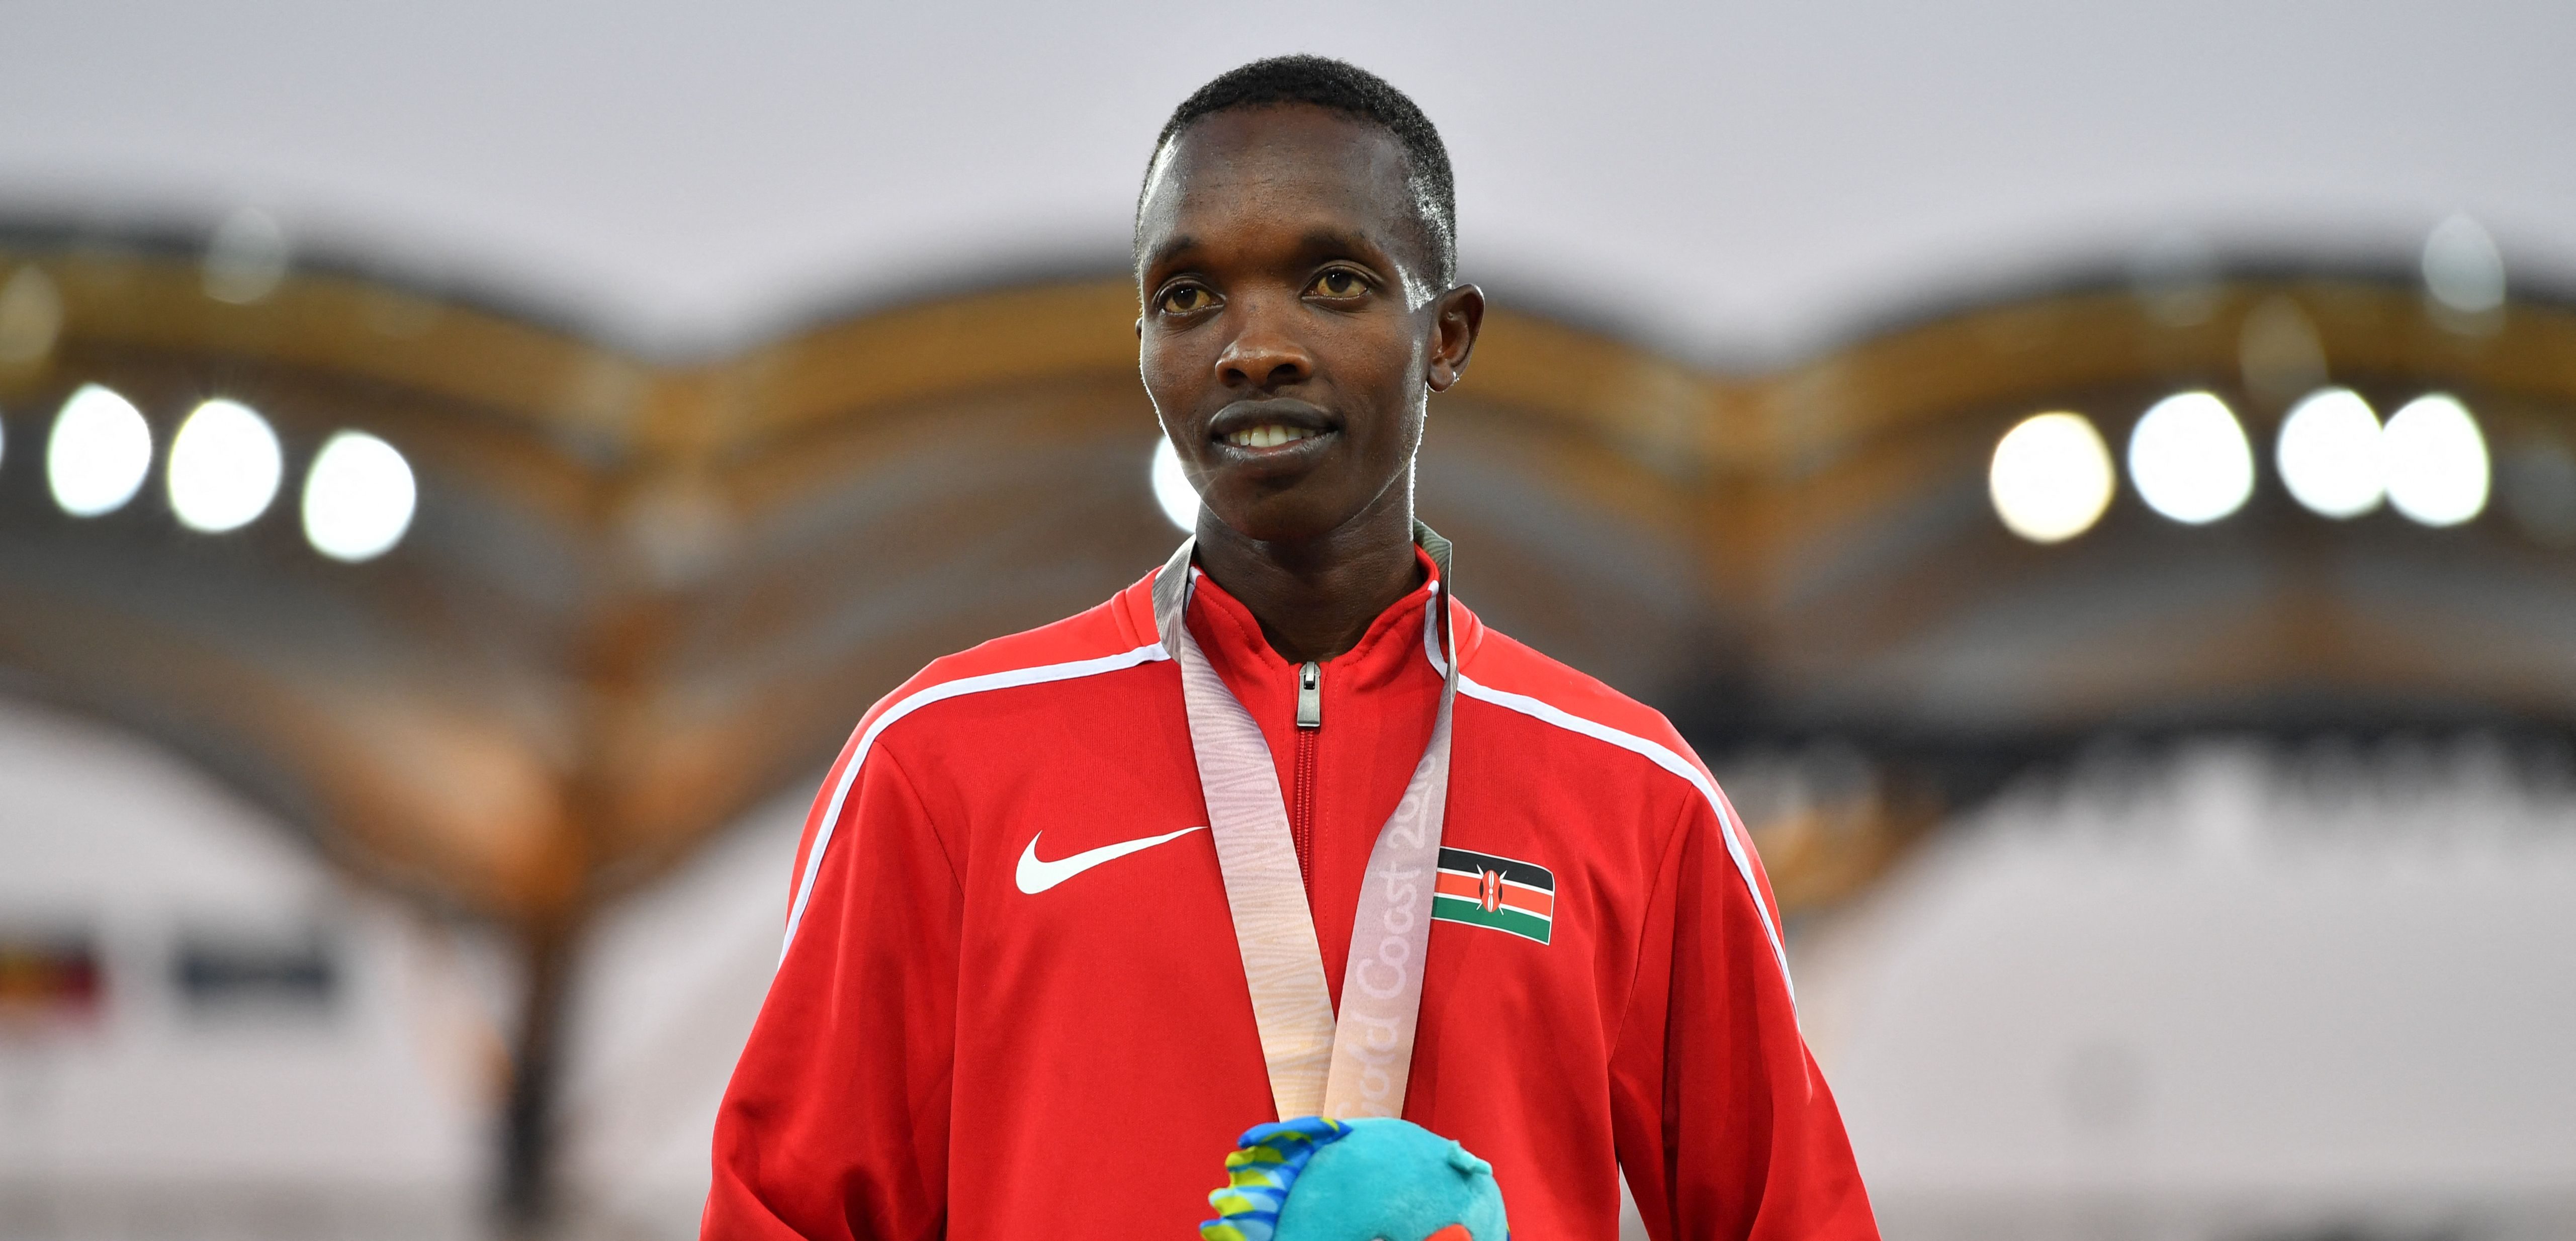 Kenyan runner Kwemoi banned 6 years for blood doping and stripped of
Olympics, world champs results